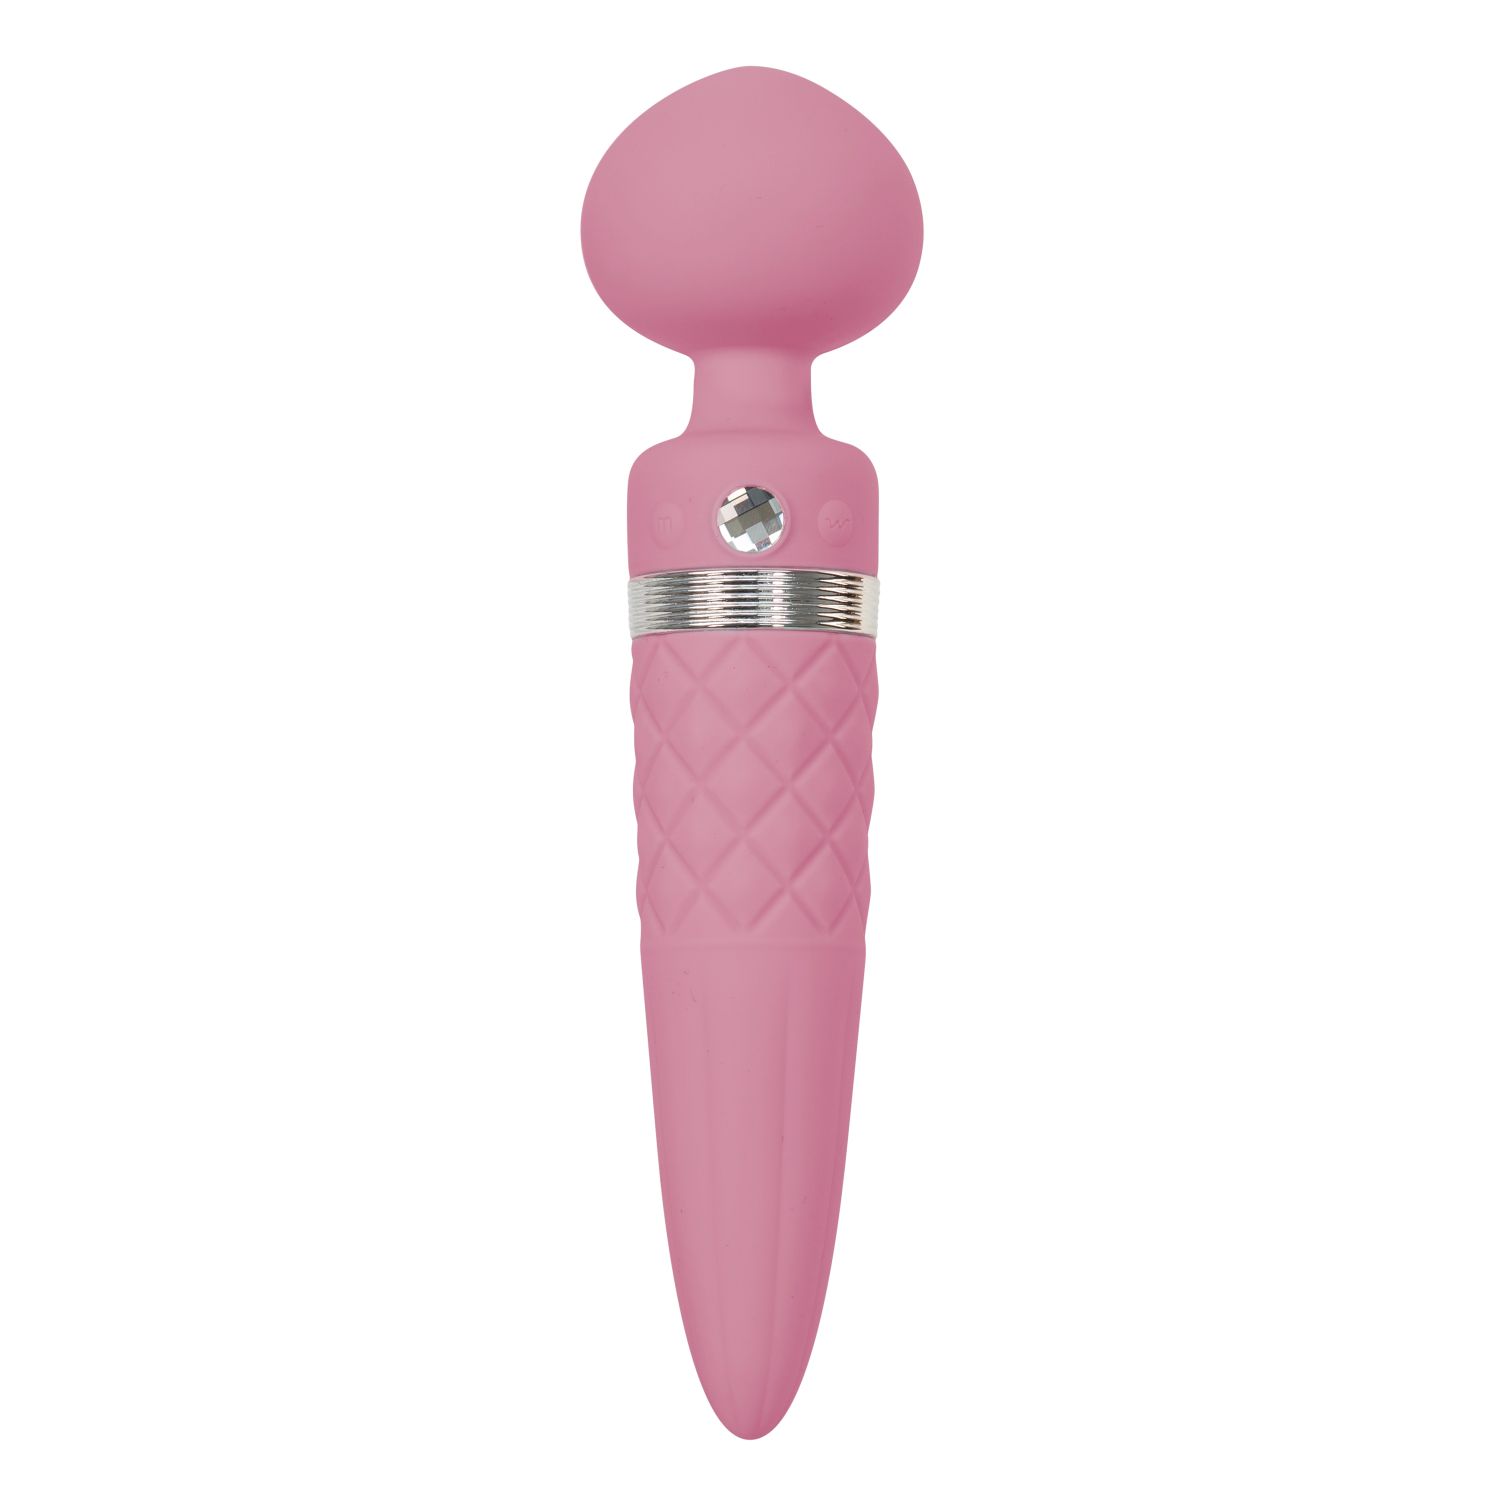 Pillow Talk – Sultry Wand Massager Pink